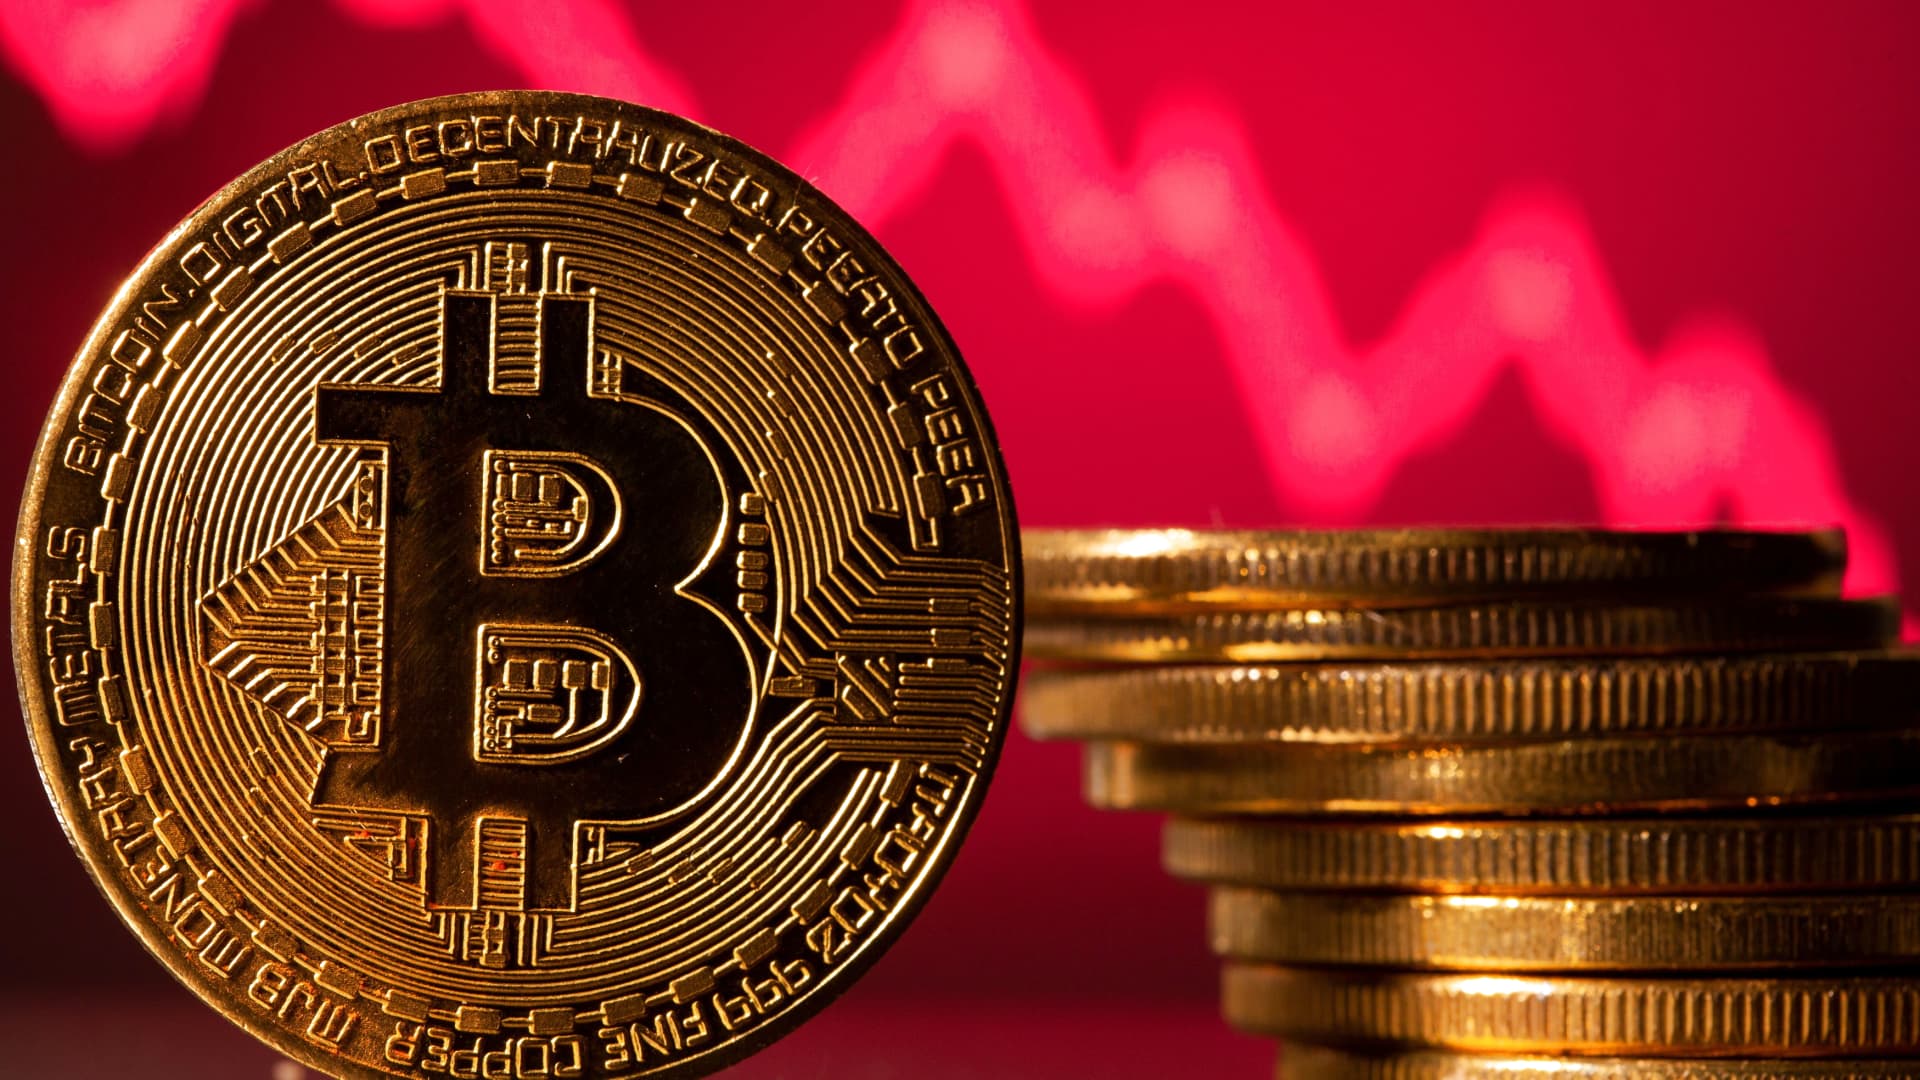 Bitcoin (BTC) falls below $30,000 as cryptocurrency market plunges